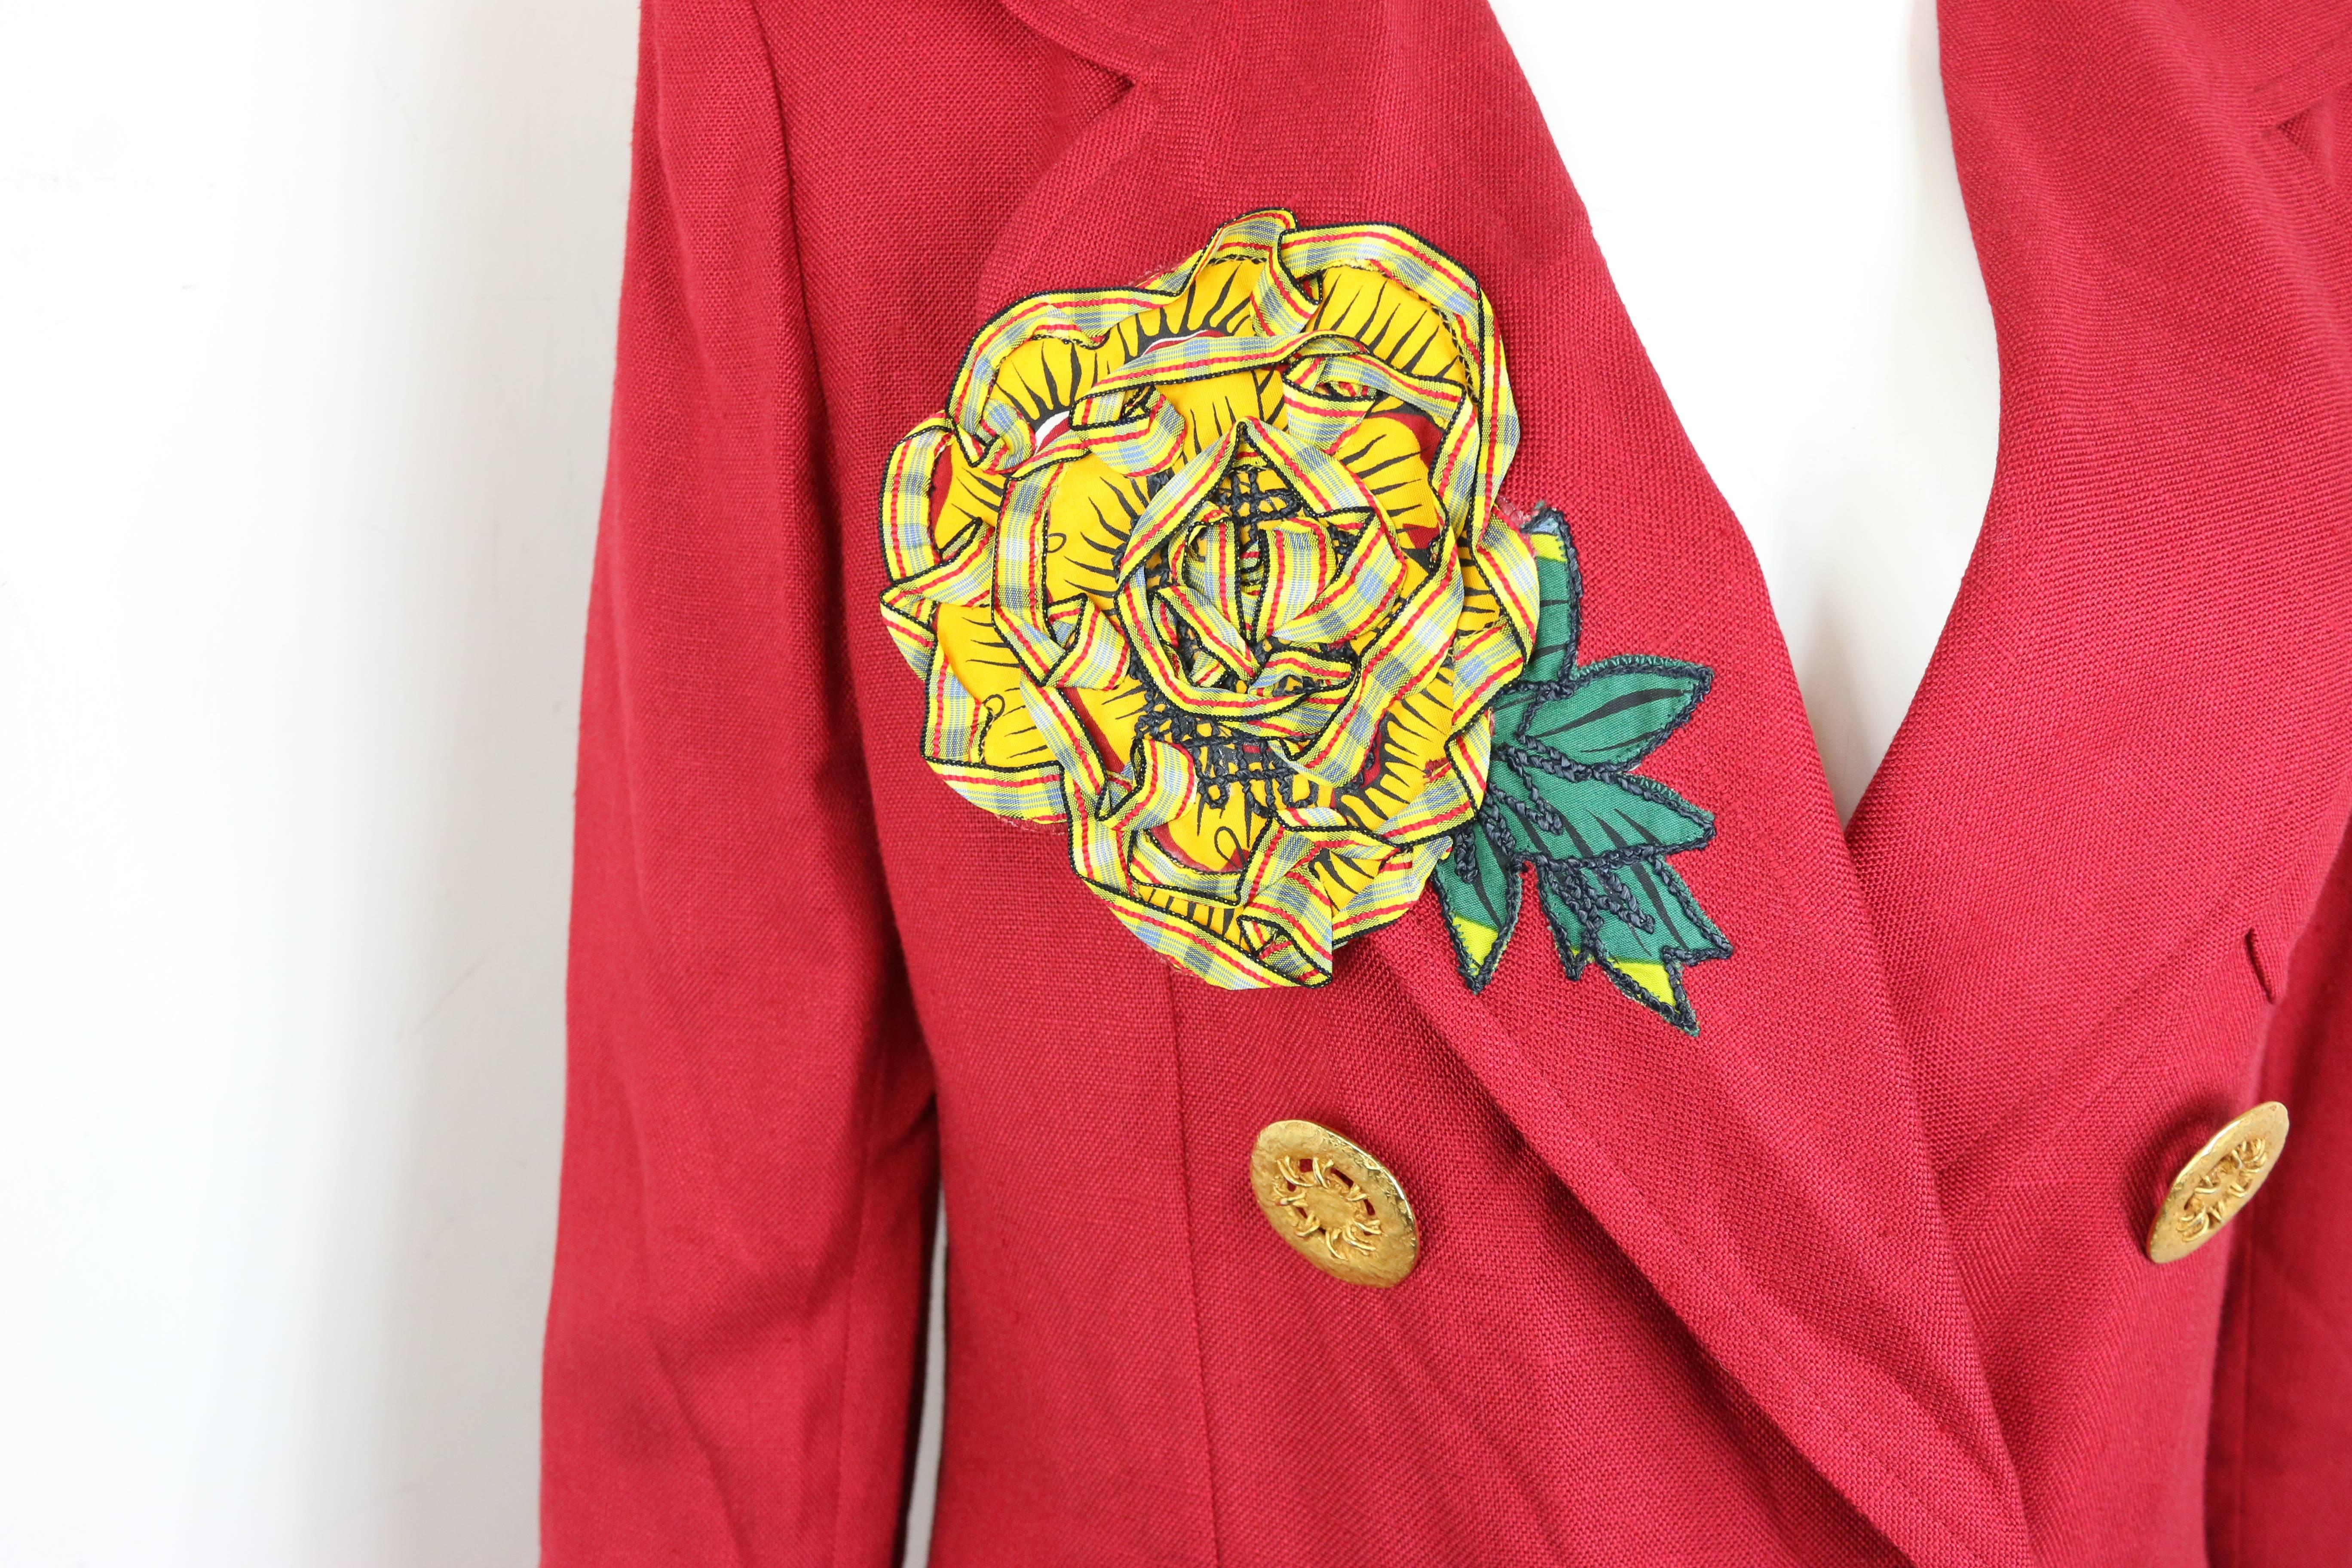 - Vintage 1994 spring Christian Lacroix red double-breasted blazer. It is a rare and collectible item. 

- Featuring a yellow ruffle sunflower on the right lapel and three at the back. 

- Gold-toned hardware buttons closure. 

- Two front open